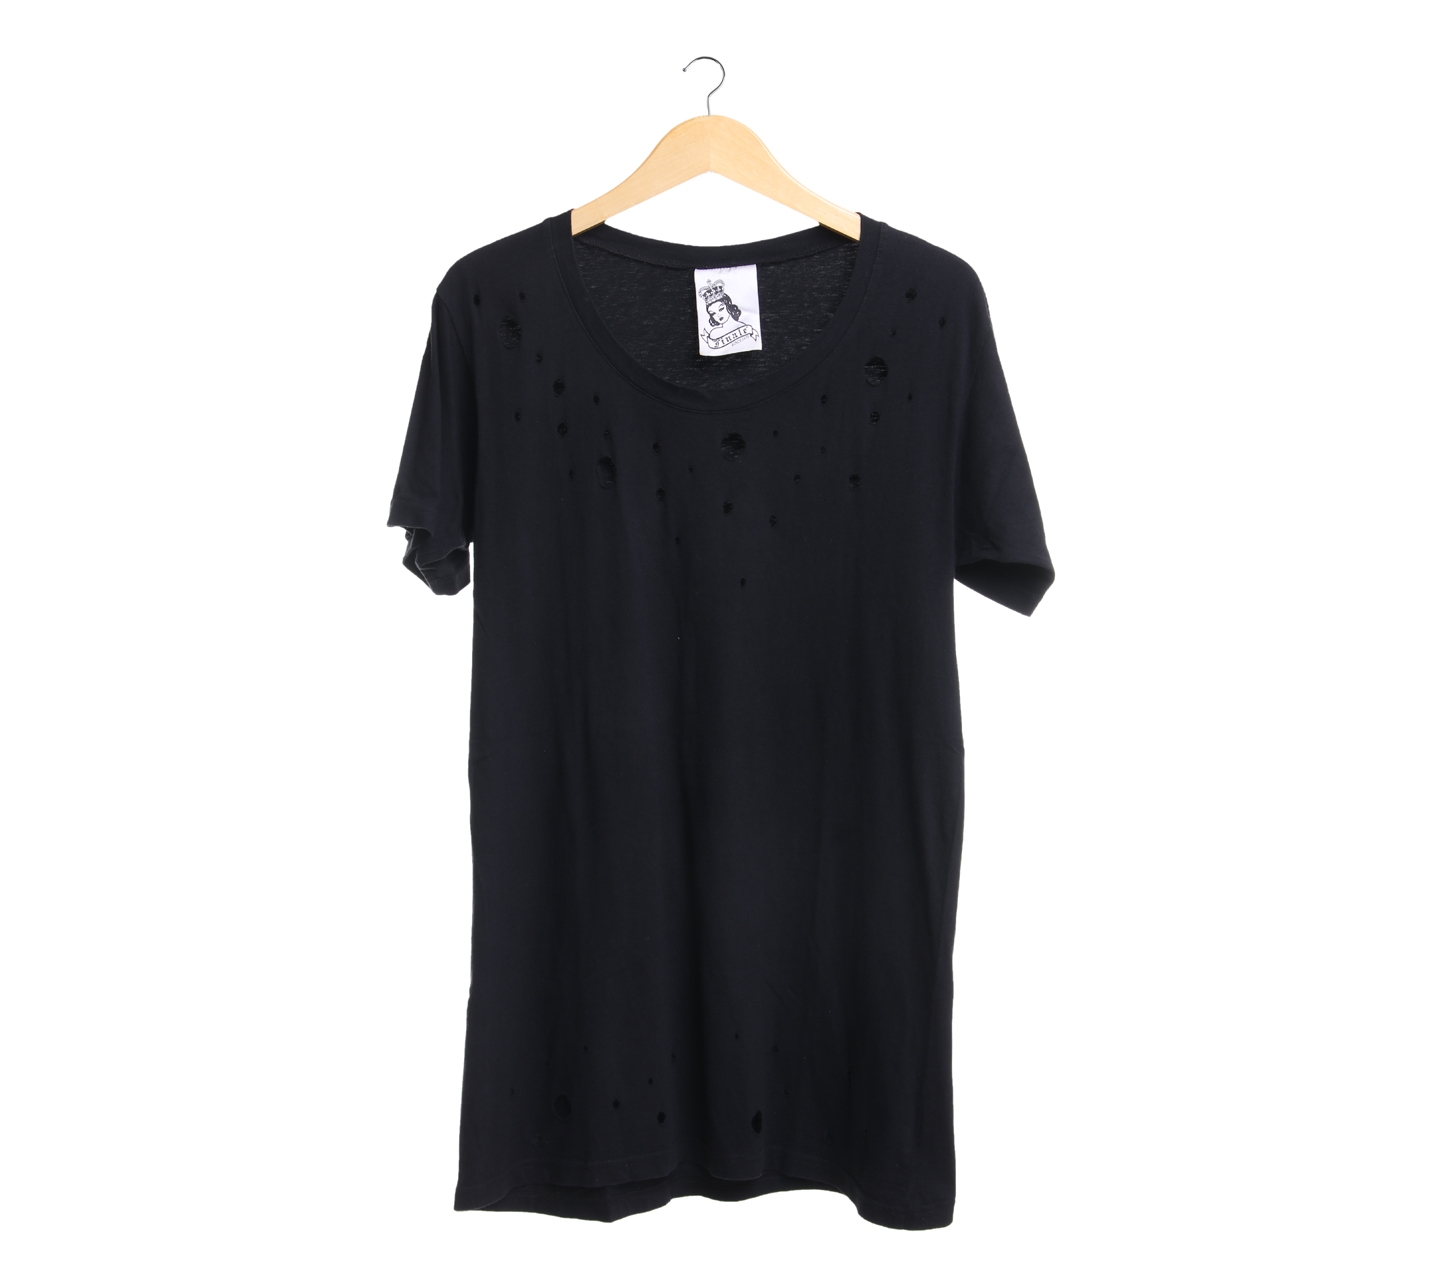 Private Collection Black T-Shirt